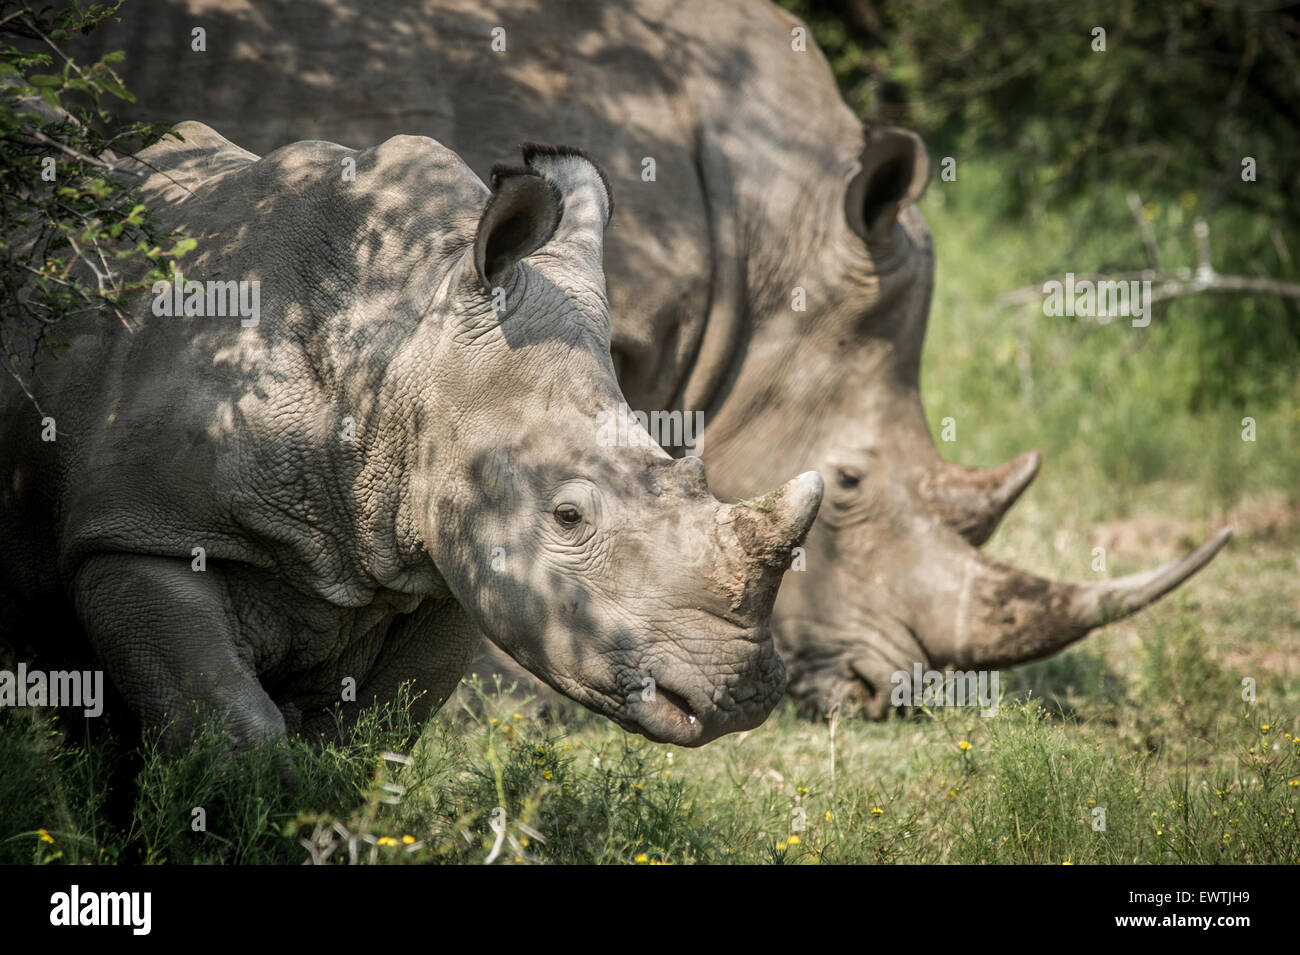 SOUTH AFRICA- A pair of rhinoceros' (Rhinocerotidae) on the Dinokeng Game Reserve Stock Photo